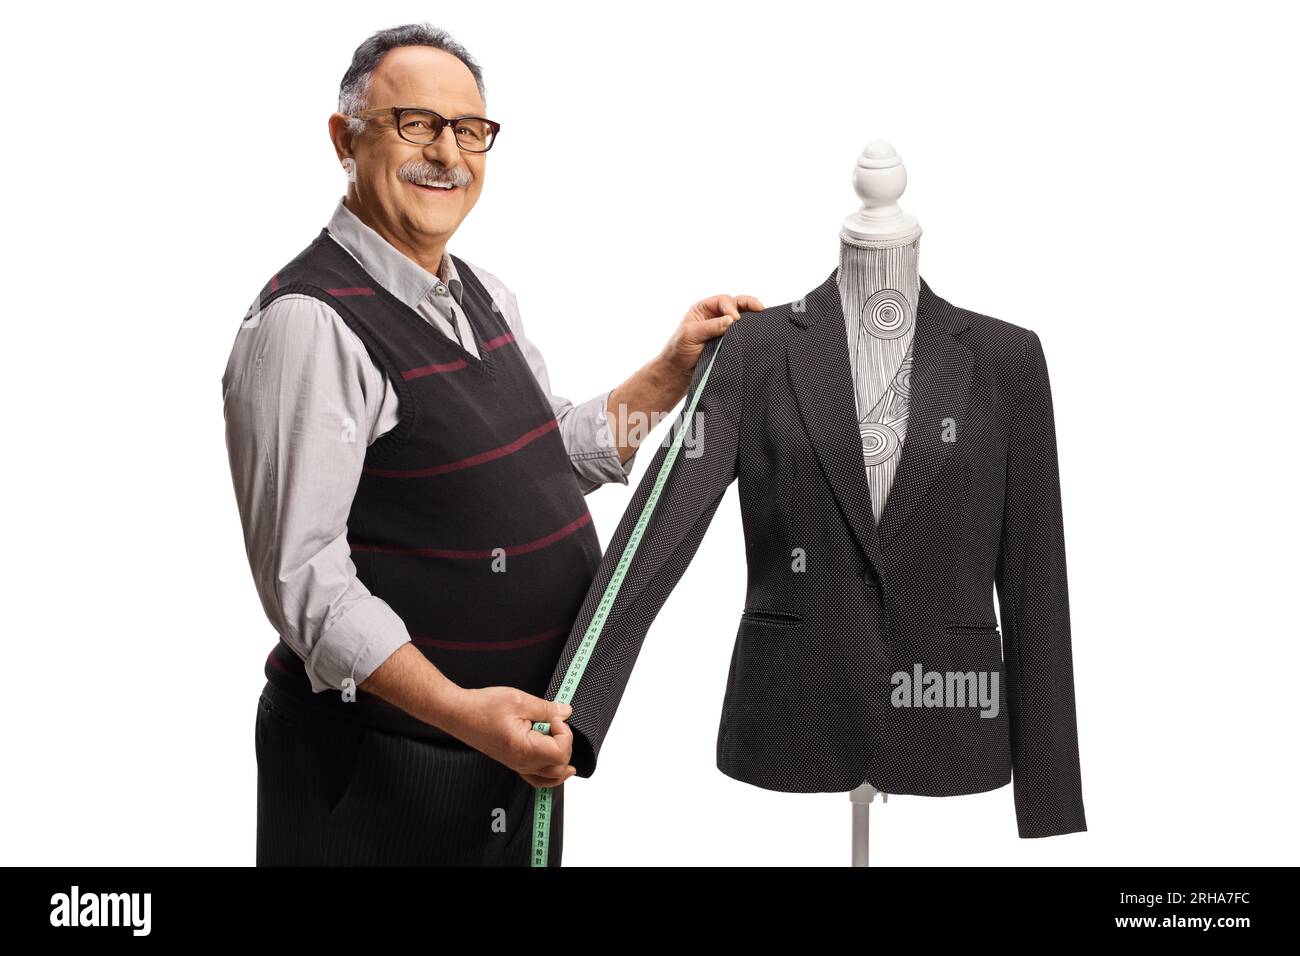 https://c8.alamy.com/comp/2RHA7FC/mature-tailor-measuring-a-suit-sleeve-on-a-mannequin-doll-isolated-on-white-background-2RHA7FC.jpg